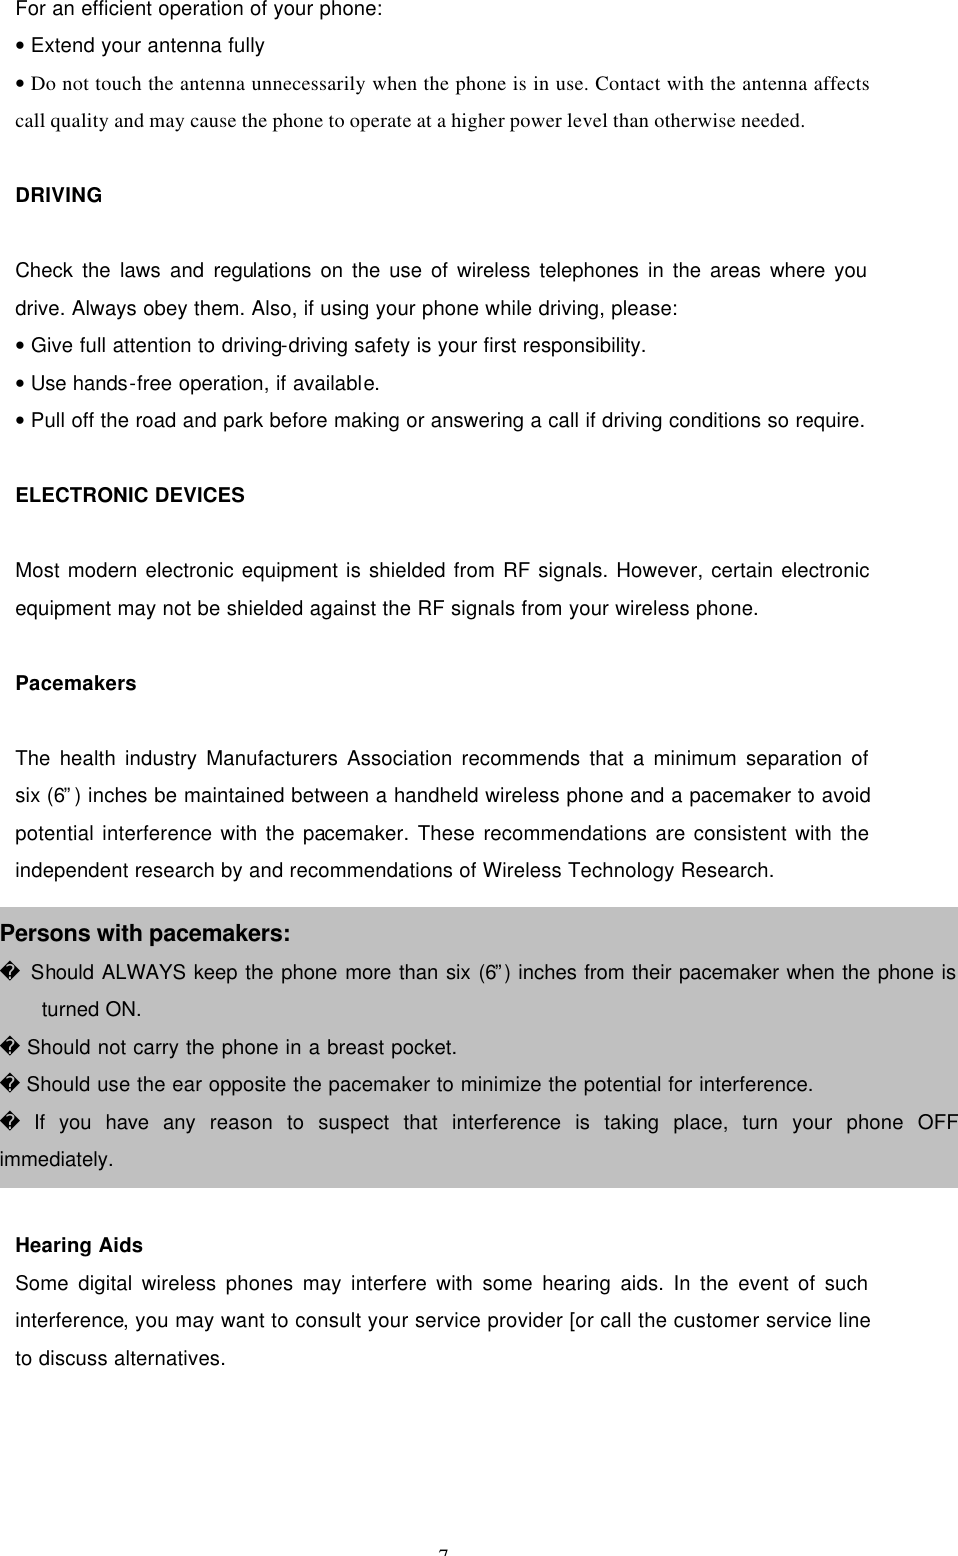 7  For an efficient operation of your phone: • Extend your antenna fully • Do not touch the antenna unnecessarily when the phone is in use. Contact with the antenna affects call quality and may cause the phone to operate at a higher power level than otherwise needed.  DRIVING  Check the laws and regulations on the use of wireless telephones in the areas where you drive. Always obey them. Also, if using your phone while driving, please: • Give full attention to driving-driving safety is your first responsibility. • Use hands-free operation, if available. • Pull off the road and park before making or answering a call if driving conditions so require.  ELECTRONIC DEVICES  Most modern electronic equipment is shielded from RF signals. However, certain electronic equipment may not be shielded against the RF signals from your wireless phone.  Pacemakers  The health industry Manufacturers Association recommends that a minimum separation of six (6”) inches be maintained between a handheld wireless phone and a pacemaker to avoid potential interference with the pacemaker. These recommendations are consistent with the independent research by and recommendations of Wireless Technology Research.  .        Hearing Aids Some digital wireless phones may interfere with some hearing aids. In the event of such interference, you may want to consult your service provider [or call the customer service line to discuss alternatives.  Persons with pacemakers:  Should ALWAYS keep the phone more than six (6”) inches from their pacemaker when the phone is turned ON.  Should not carry the phone in a breast pocket.  Should use the ear opposite the pacemaker to minimize the potential for interference.  If you have any reason to suspect that interference is taking place, turn your phone OFF immediately. 